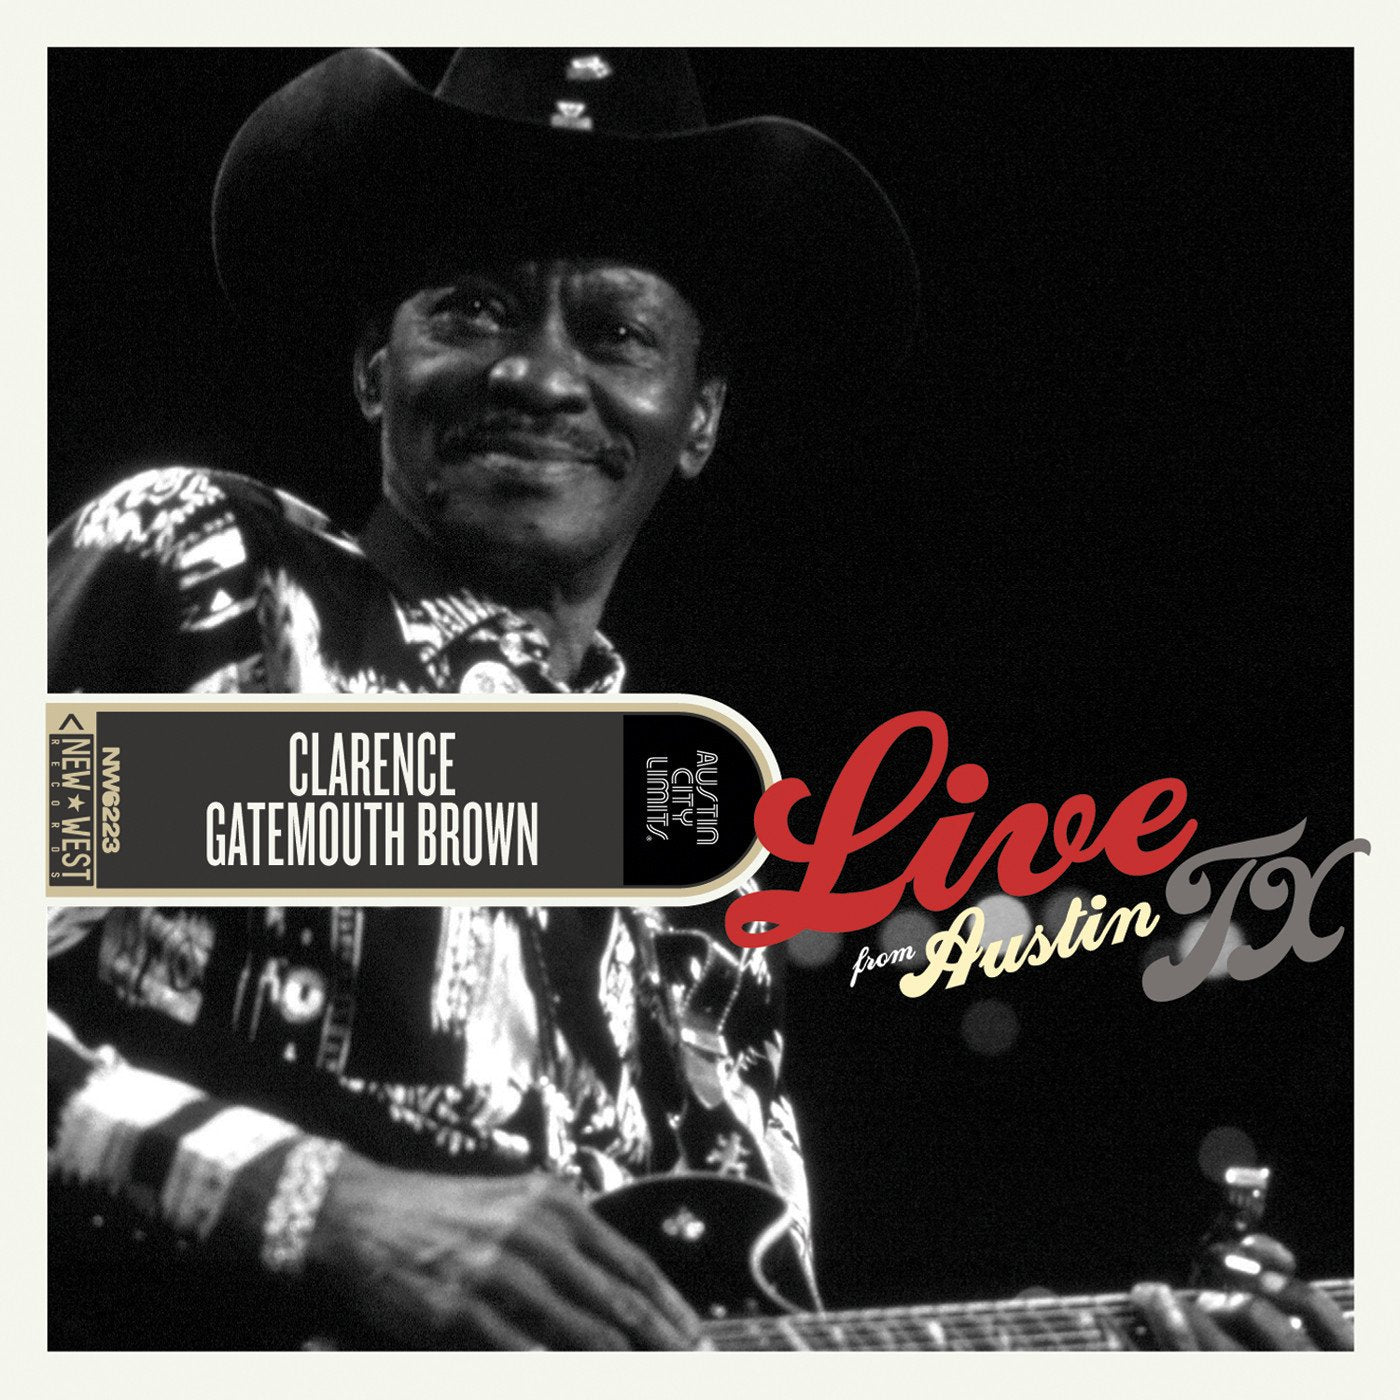 Clarence Gatemouth Brown - Live From Austin, TX [CD/DVD]